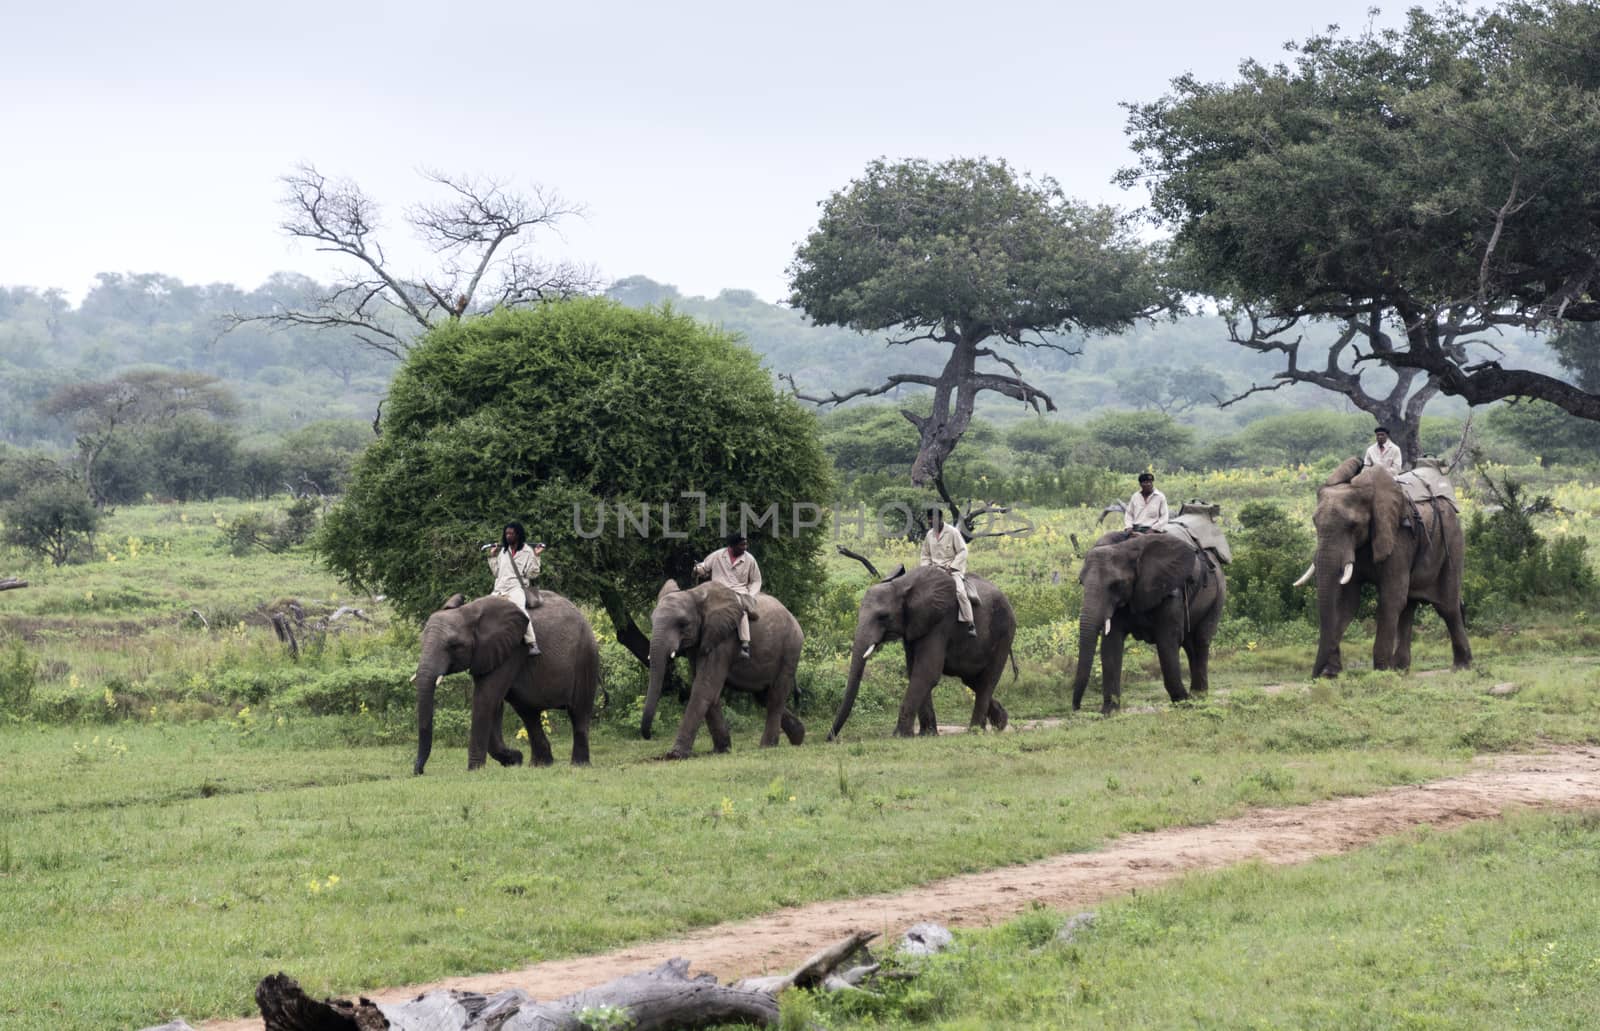 elephant back safari in south africa by compuinfoto